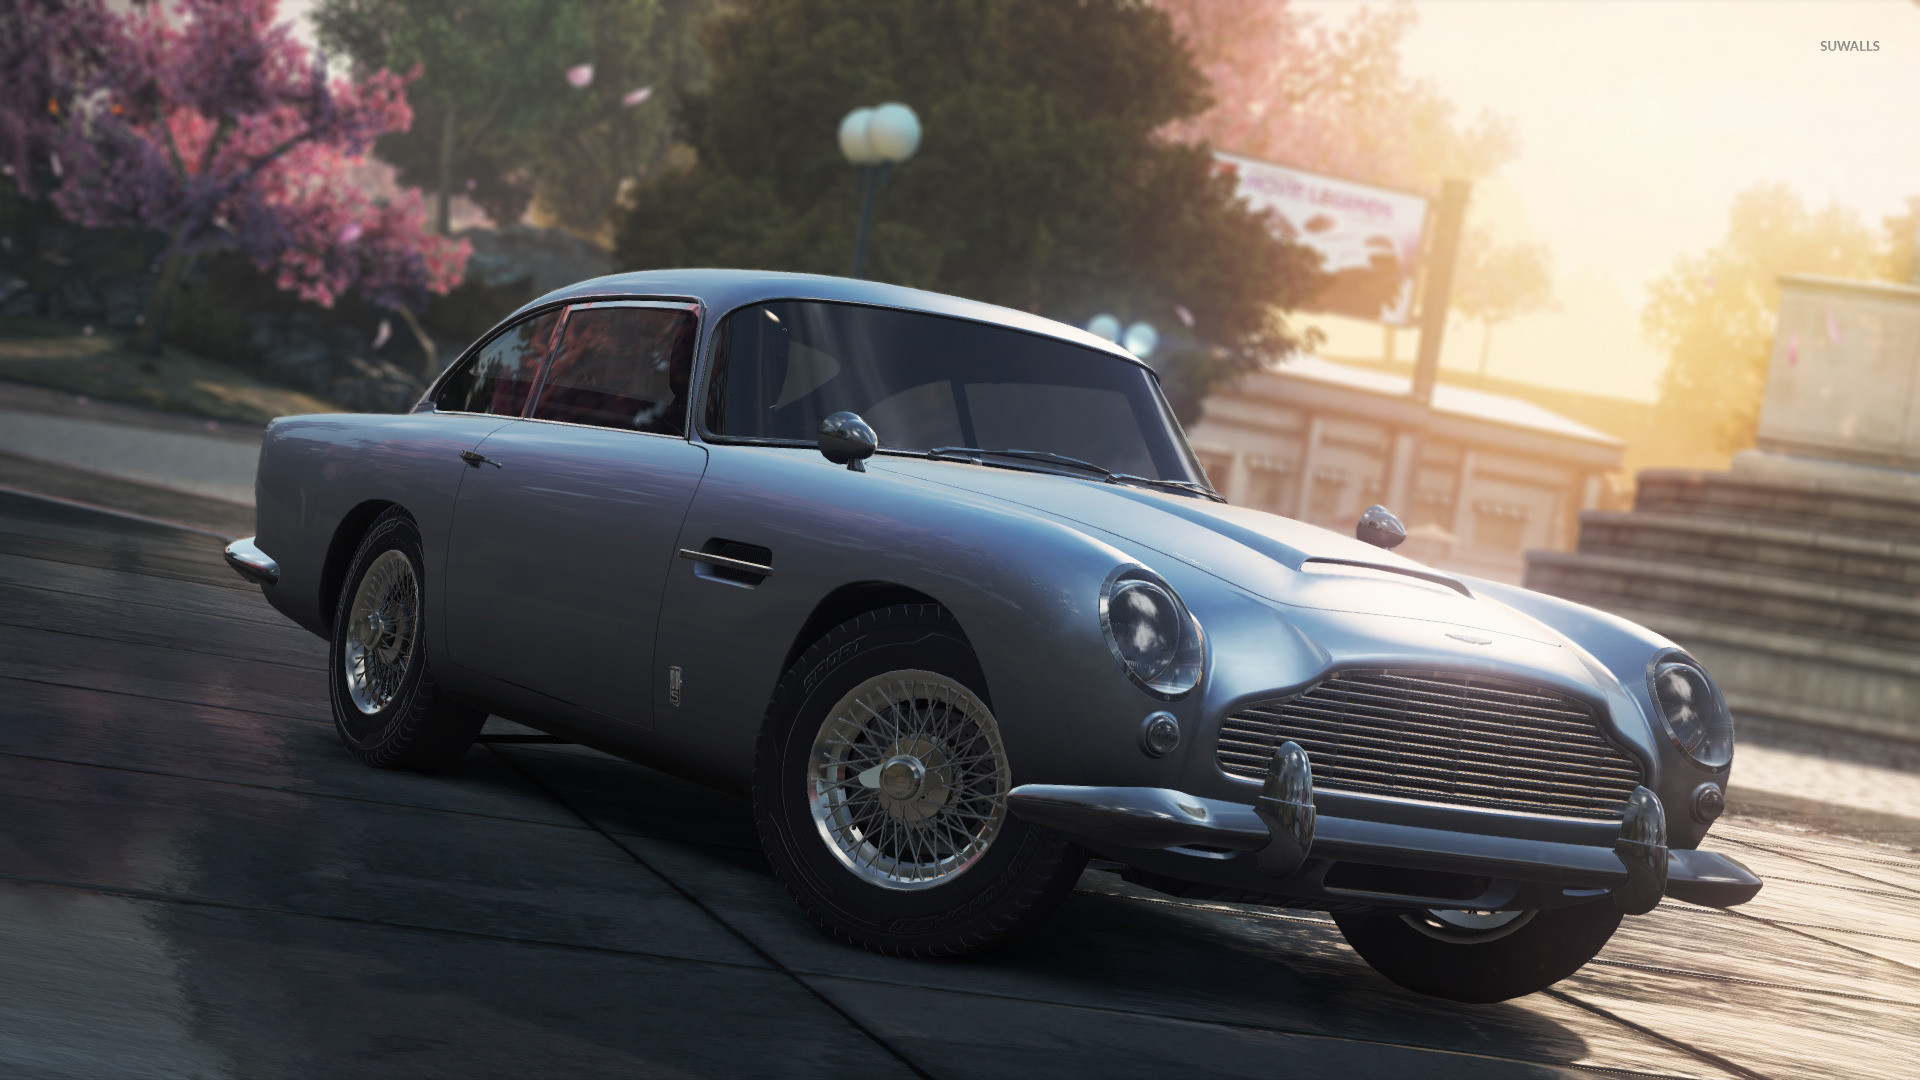 1920x1080 Aston Martin DB5 Vantage - Need for Speed: Most Wanted wallpaper